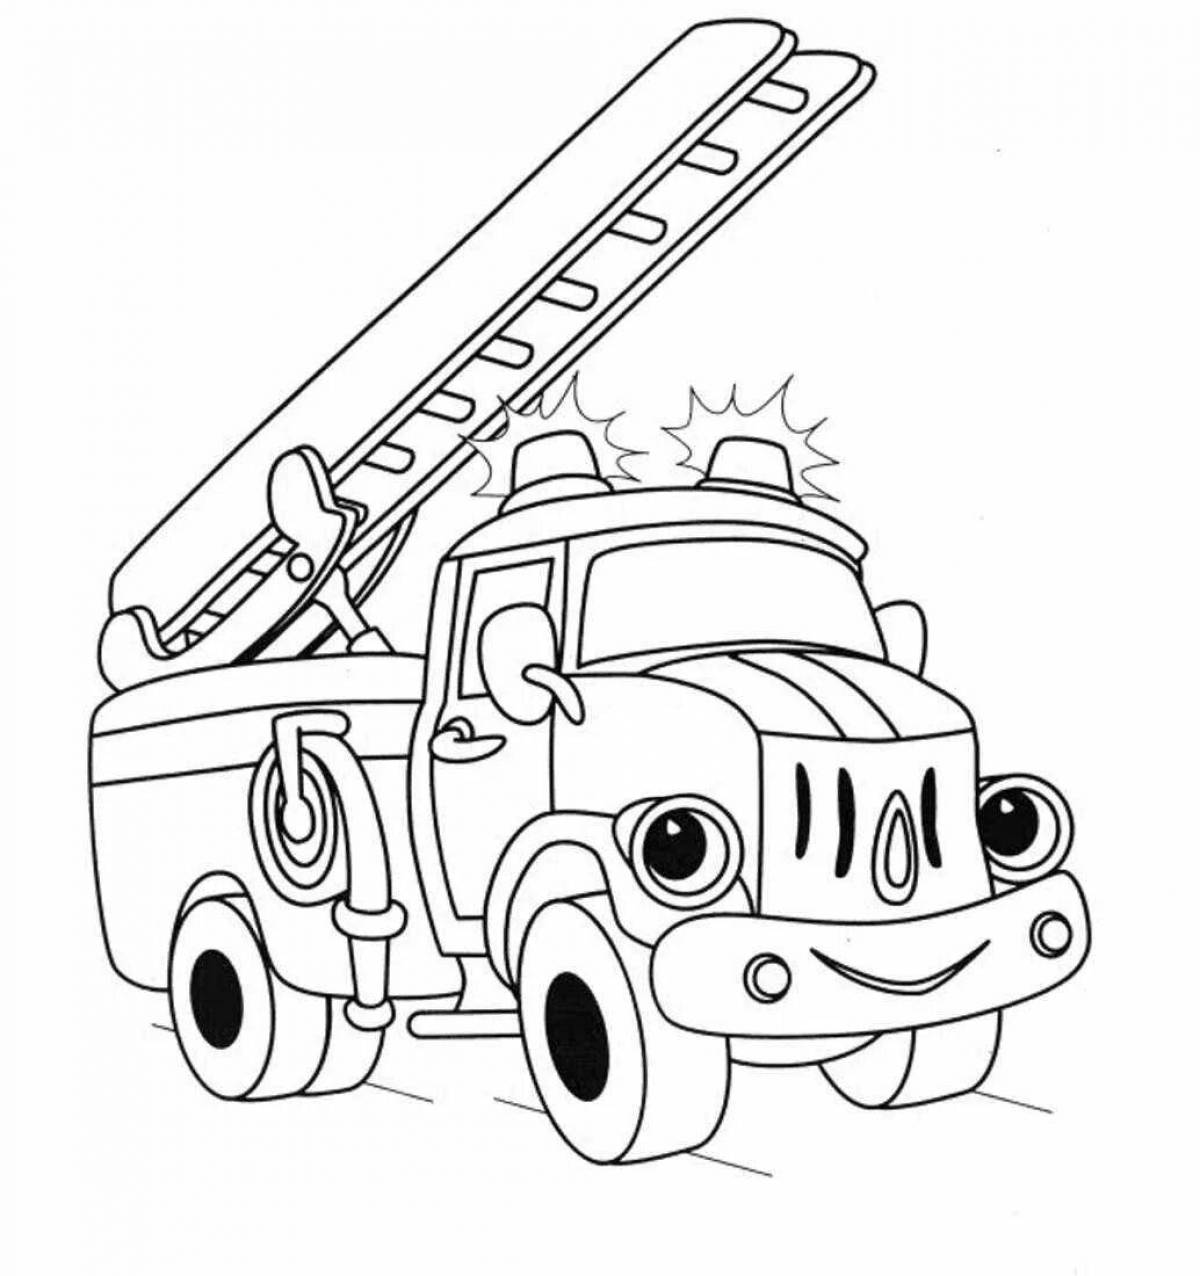 Fire truck coloring page for kids 2-3 years old